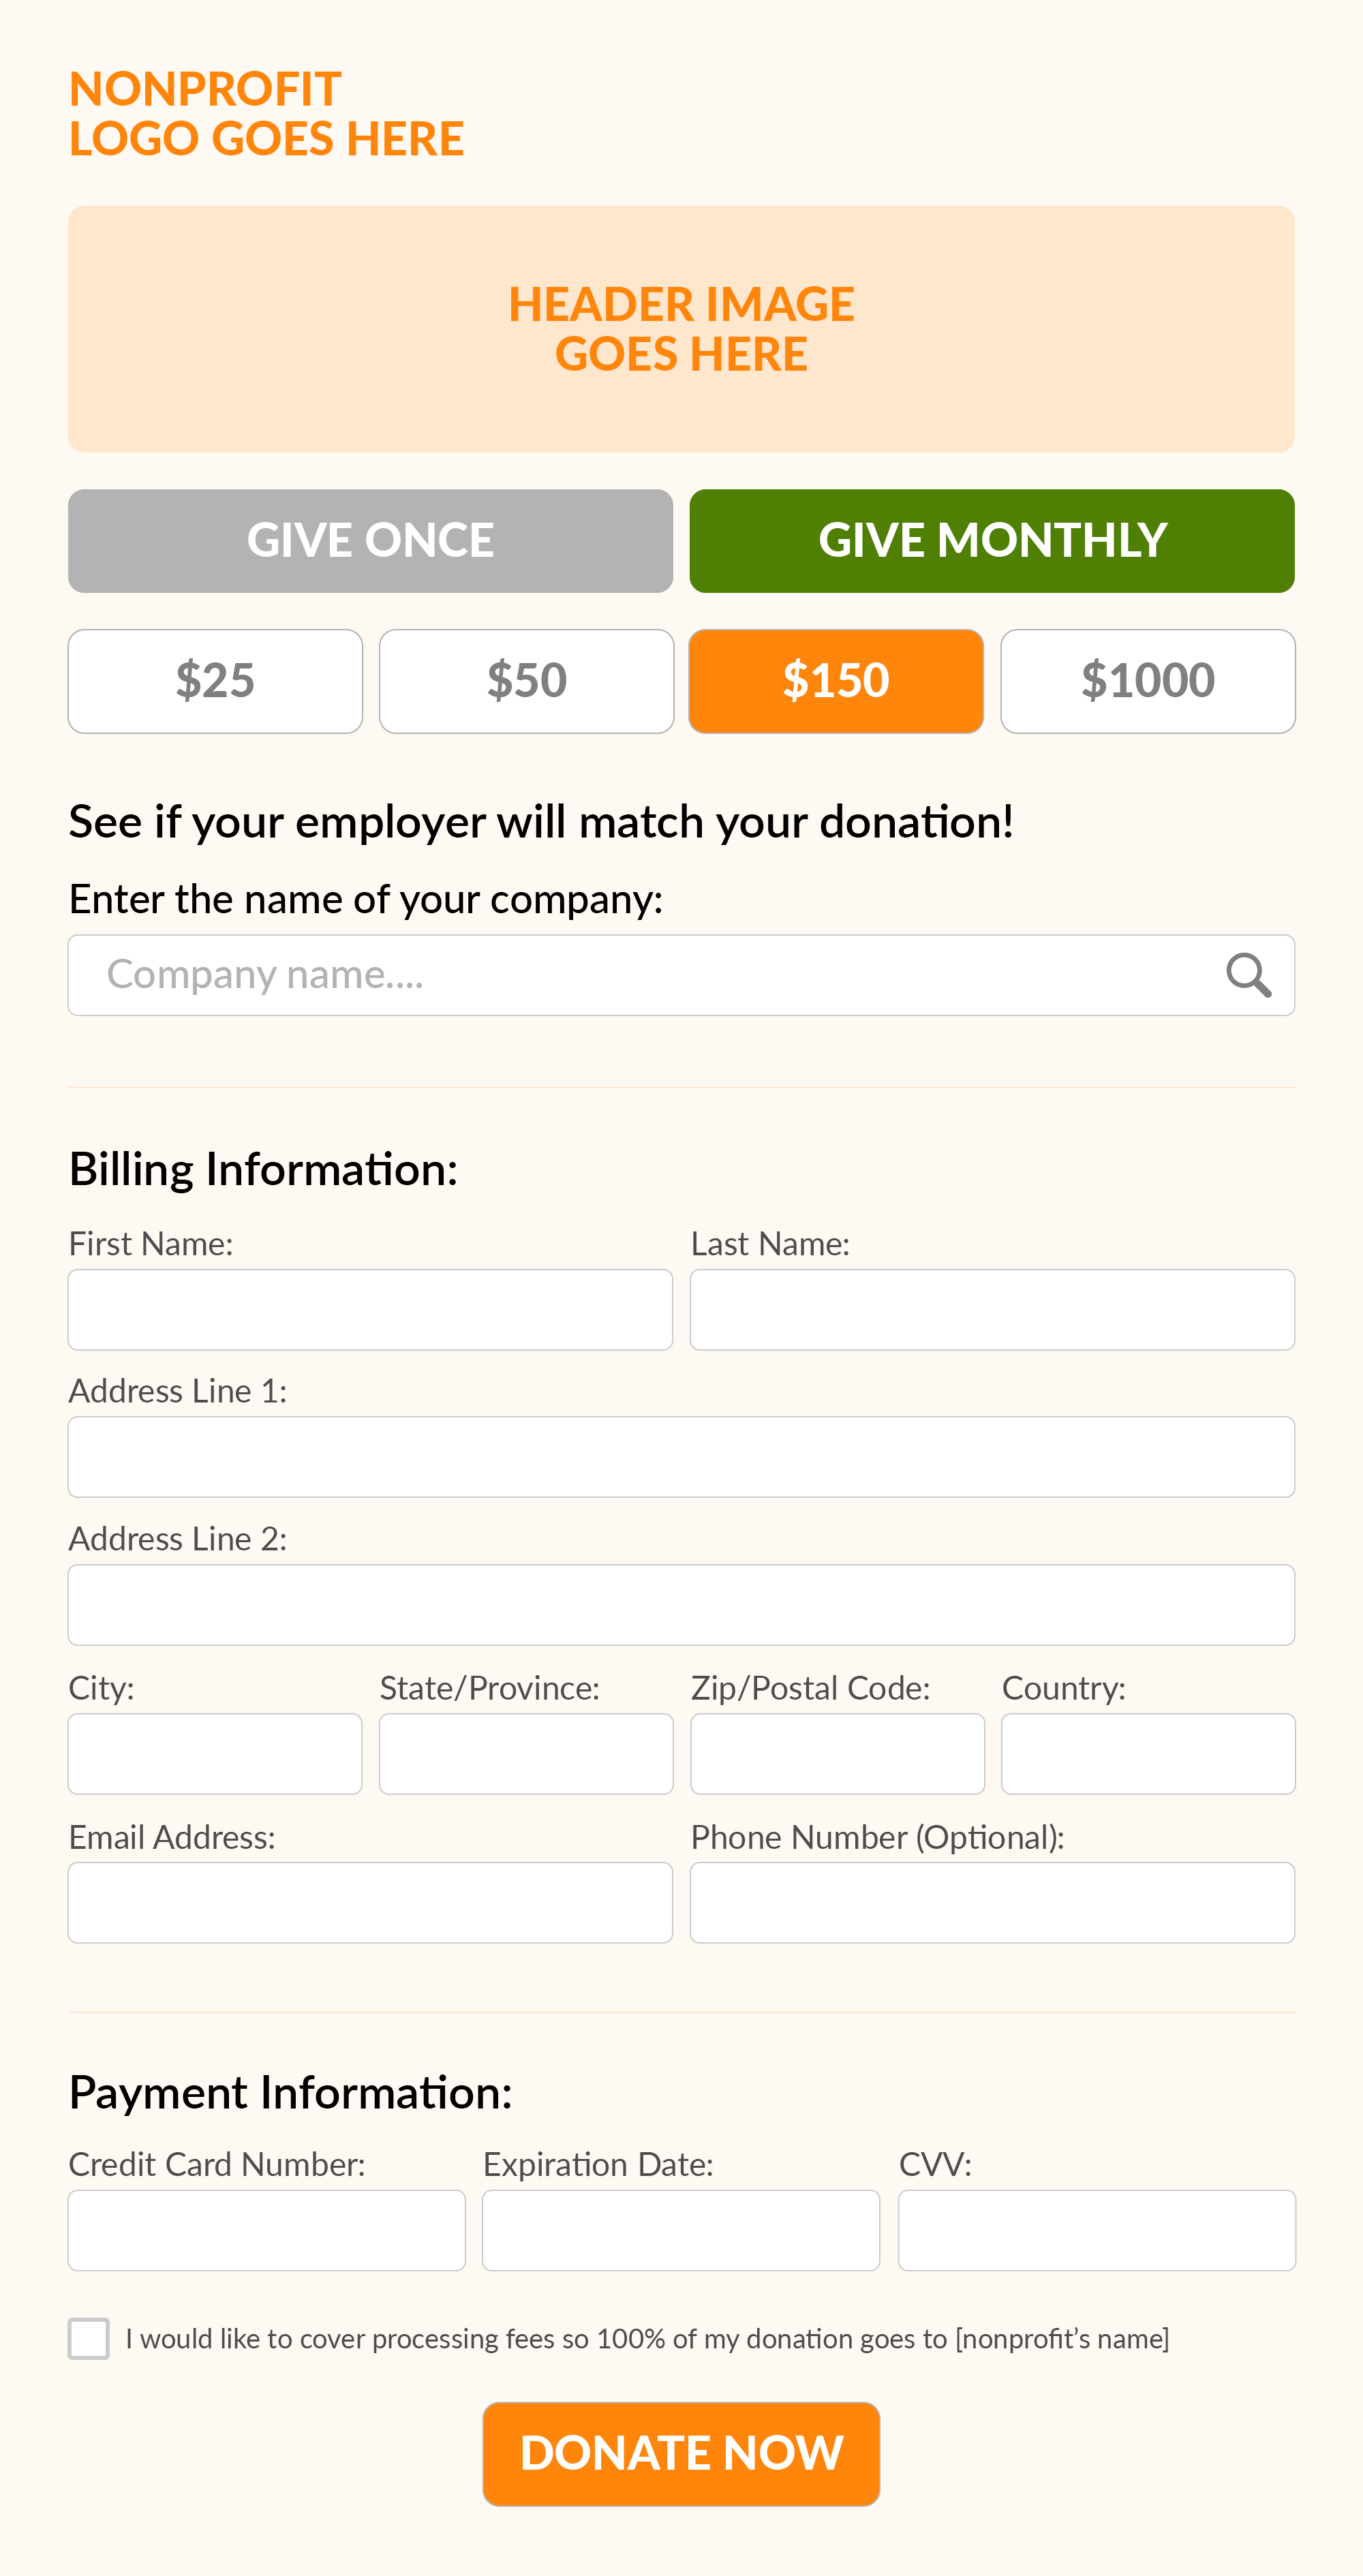 Nonprofit donation page template that includes the best practices listed in the section below